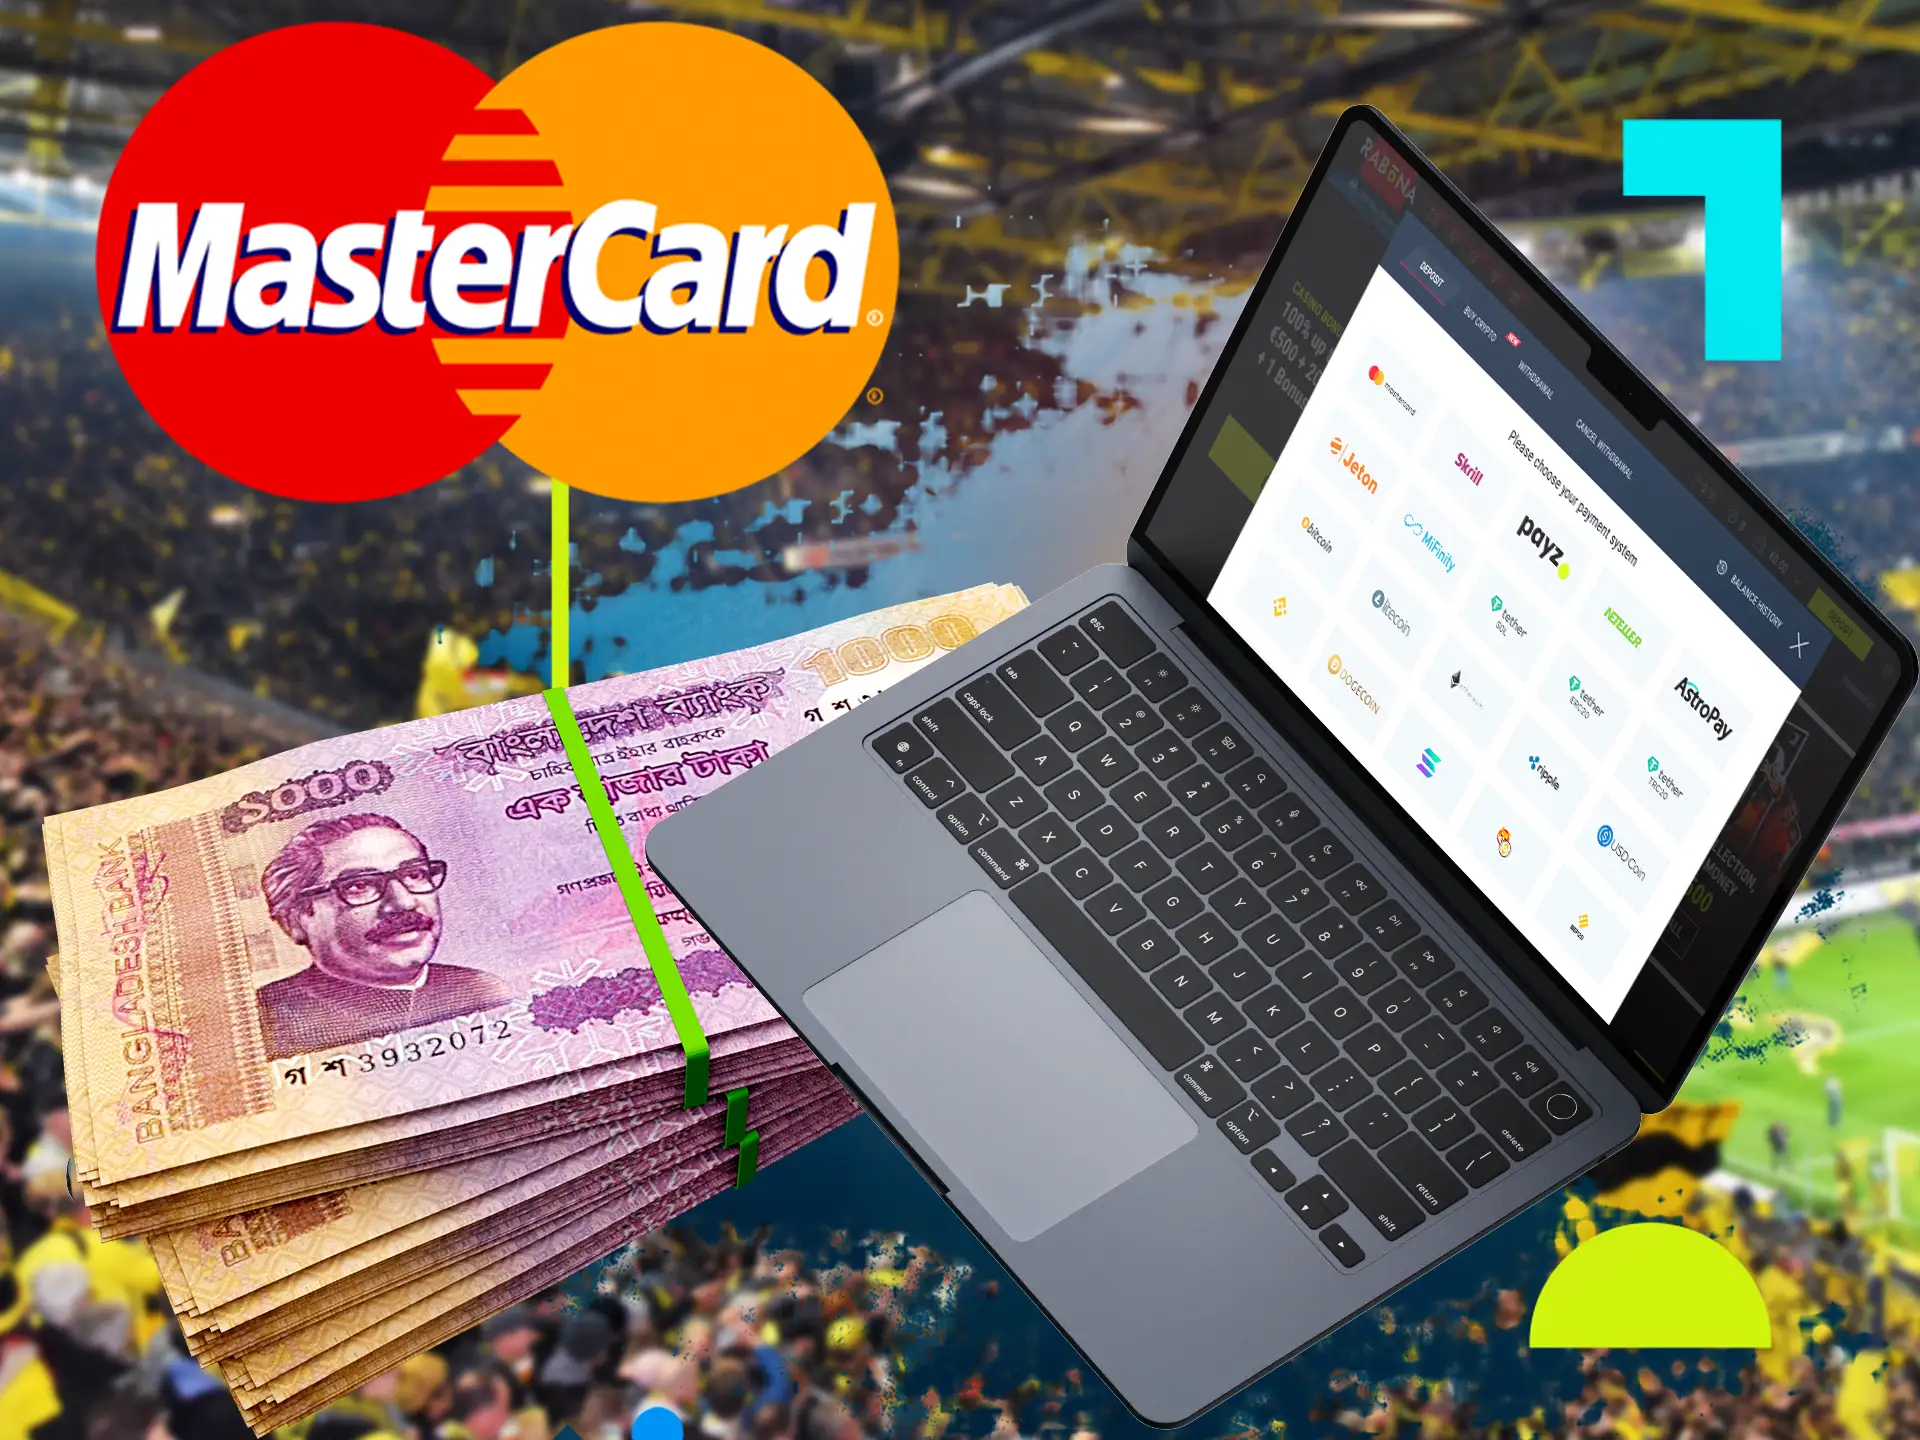 Having a MasterCard in Bangladesh ensures that you are guaranteed to receive your winnings without risk.